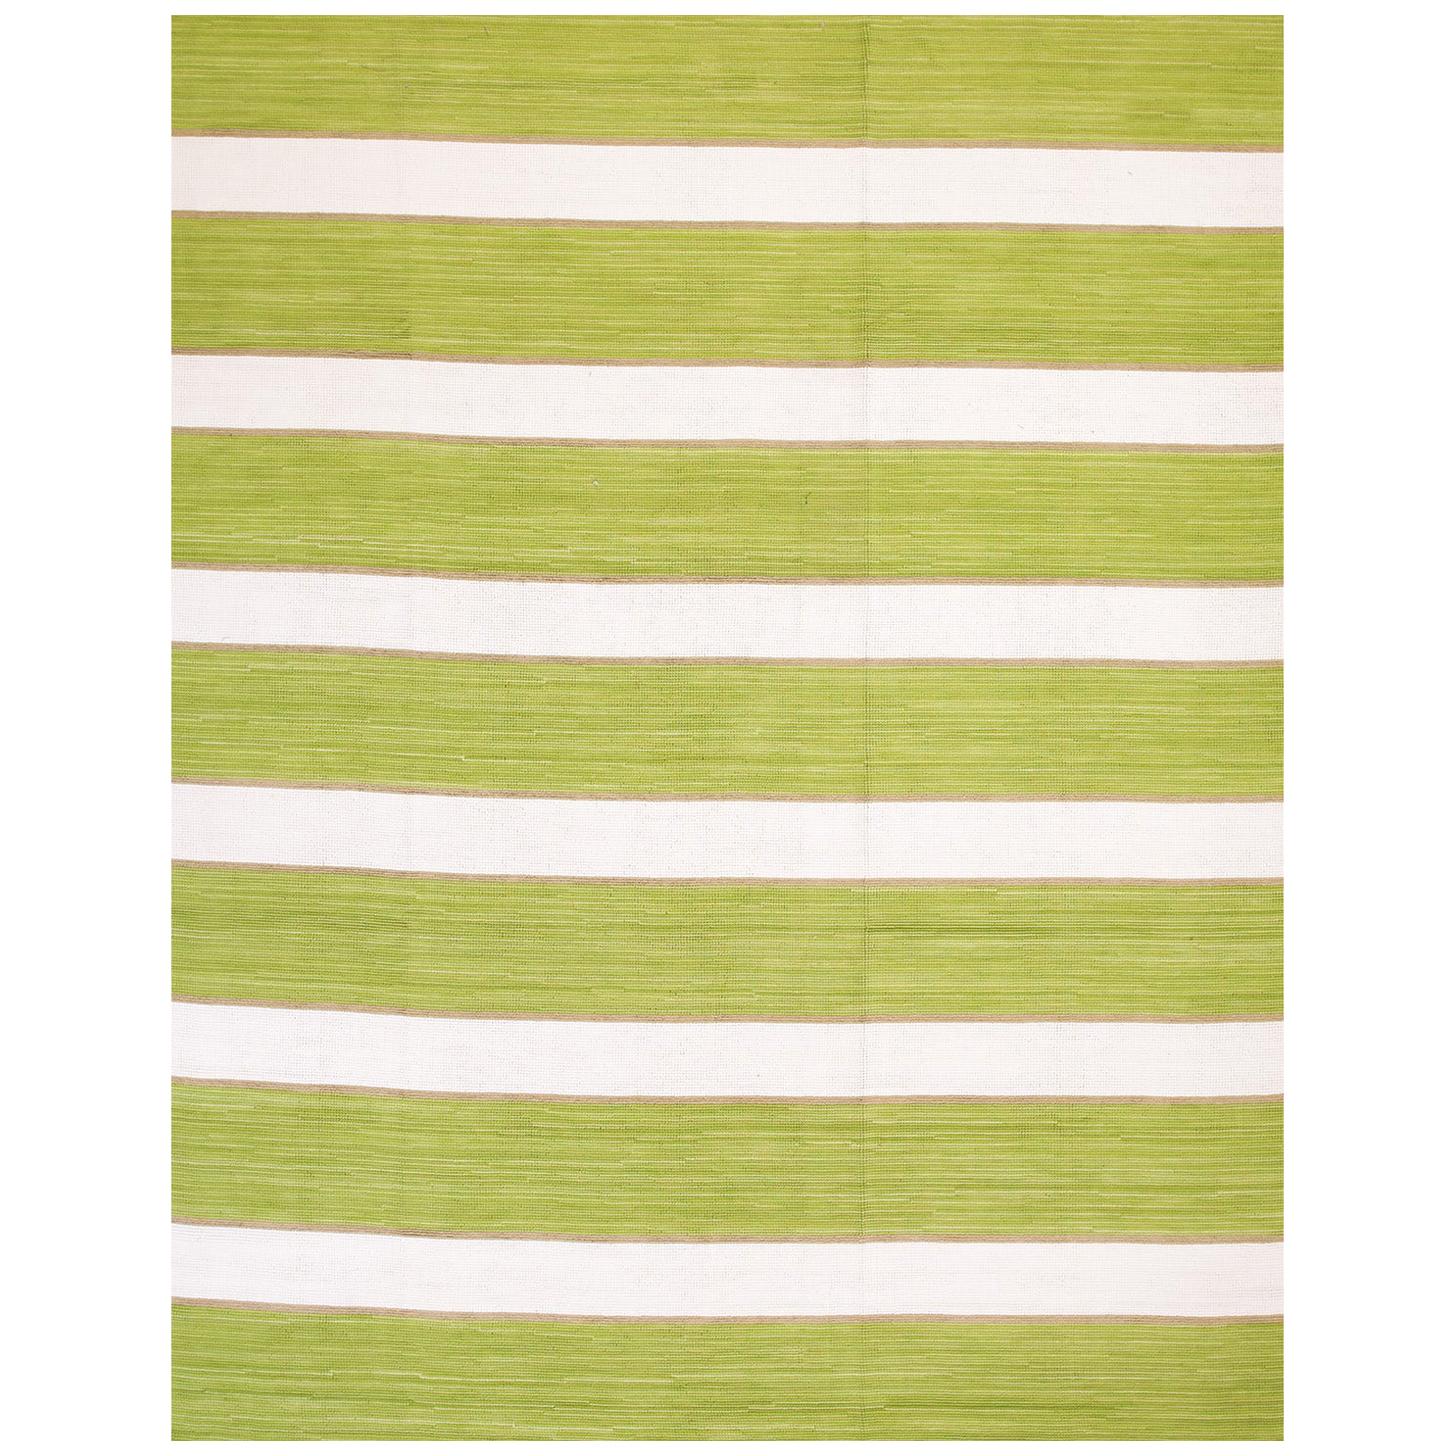 Contemporary American Hooked Rug (8' x 10' - 243 x 304) For Sale